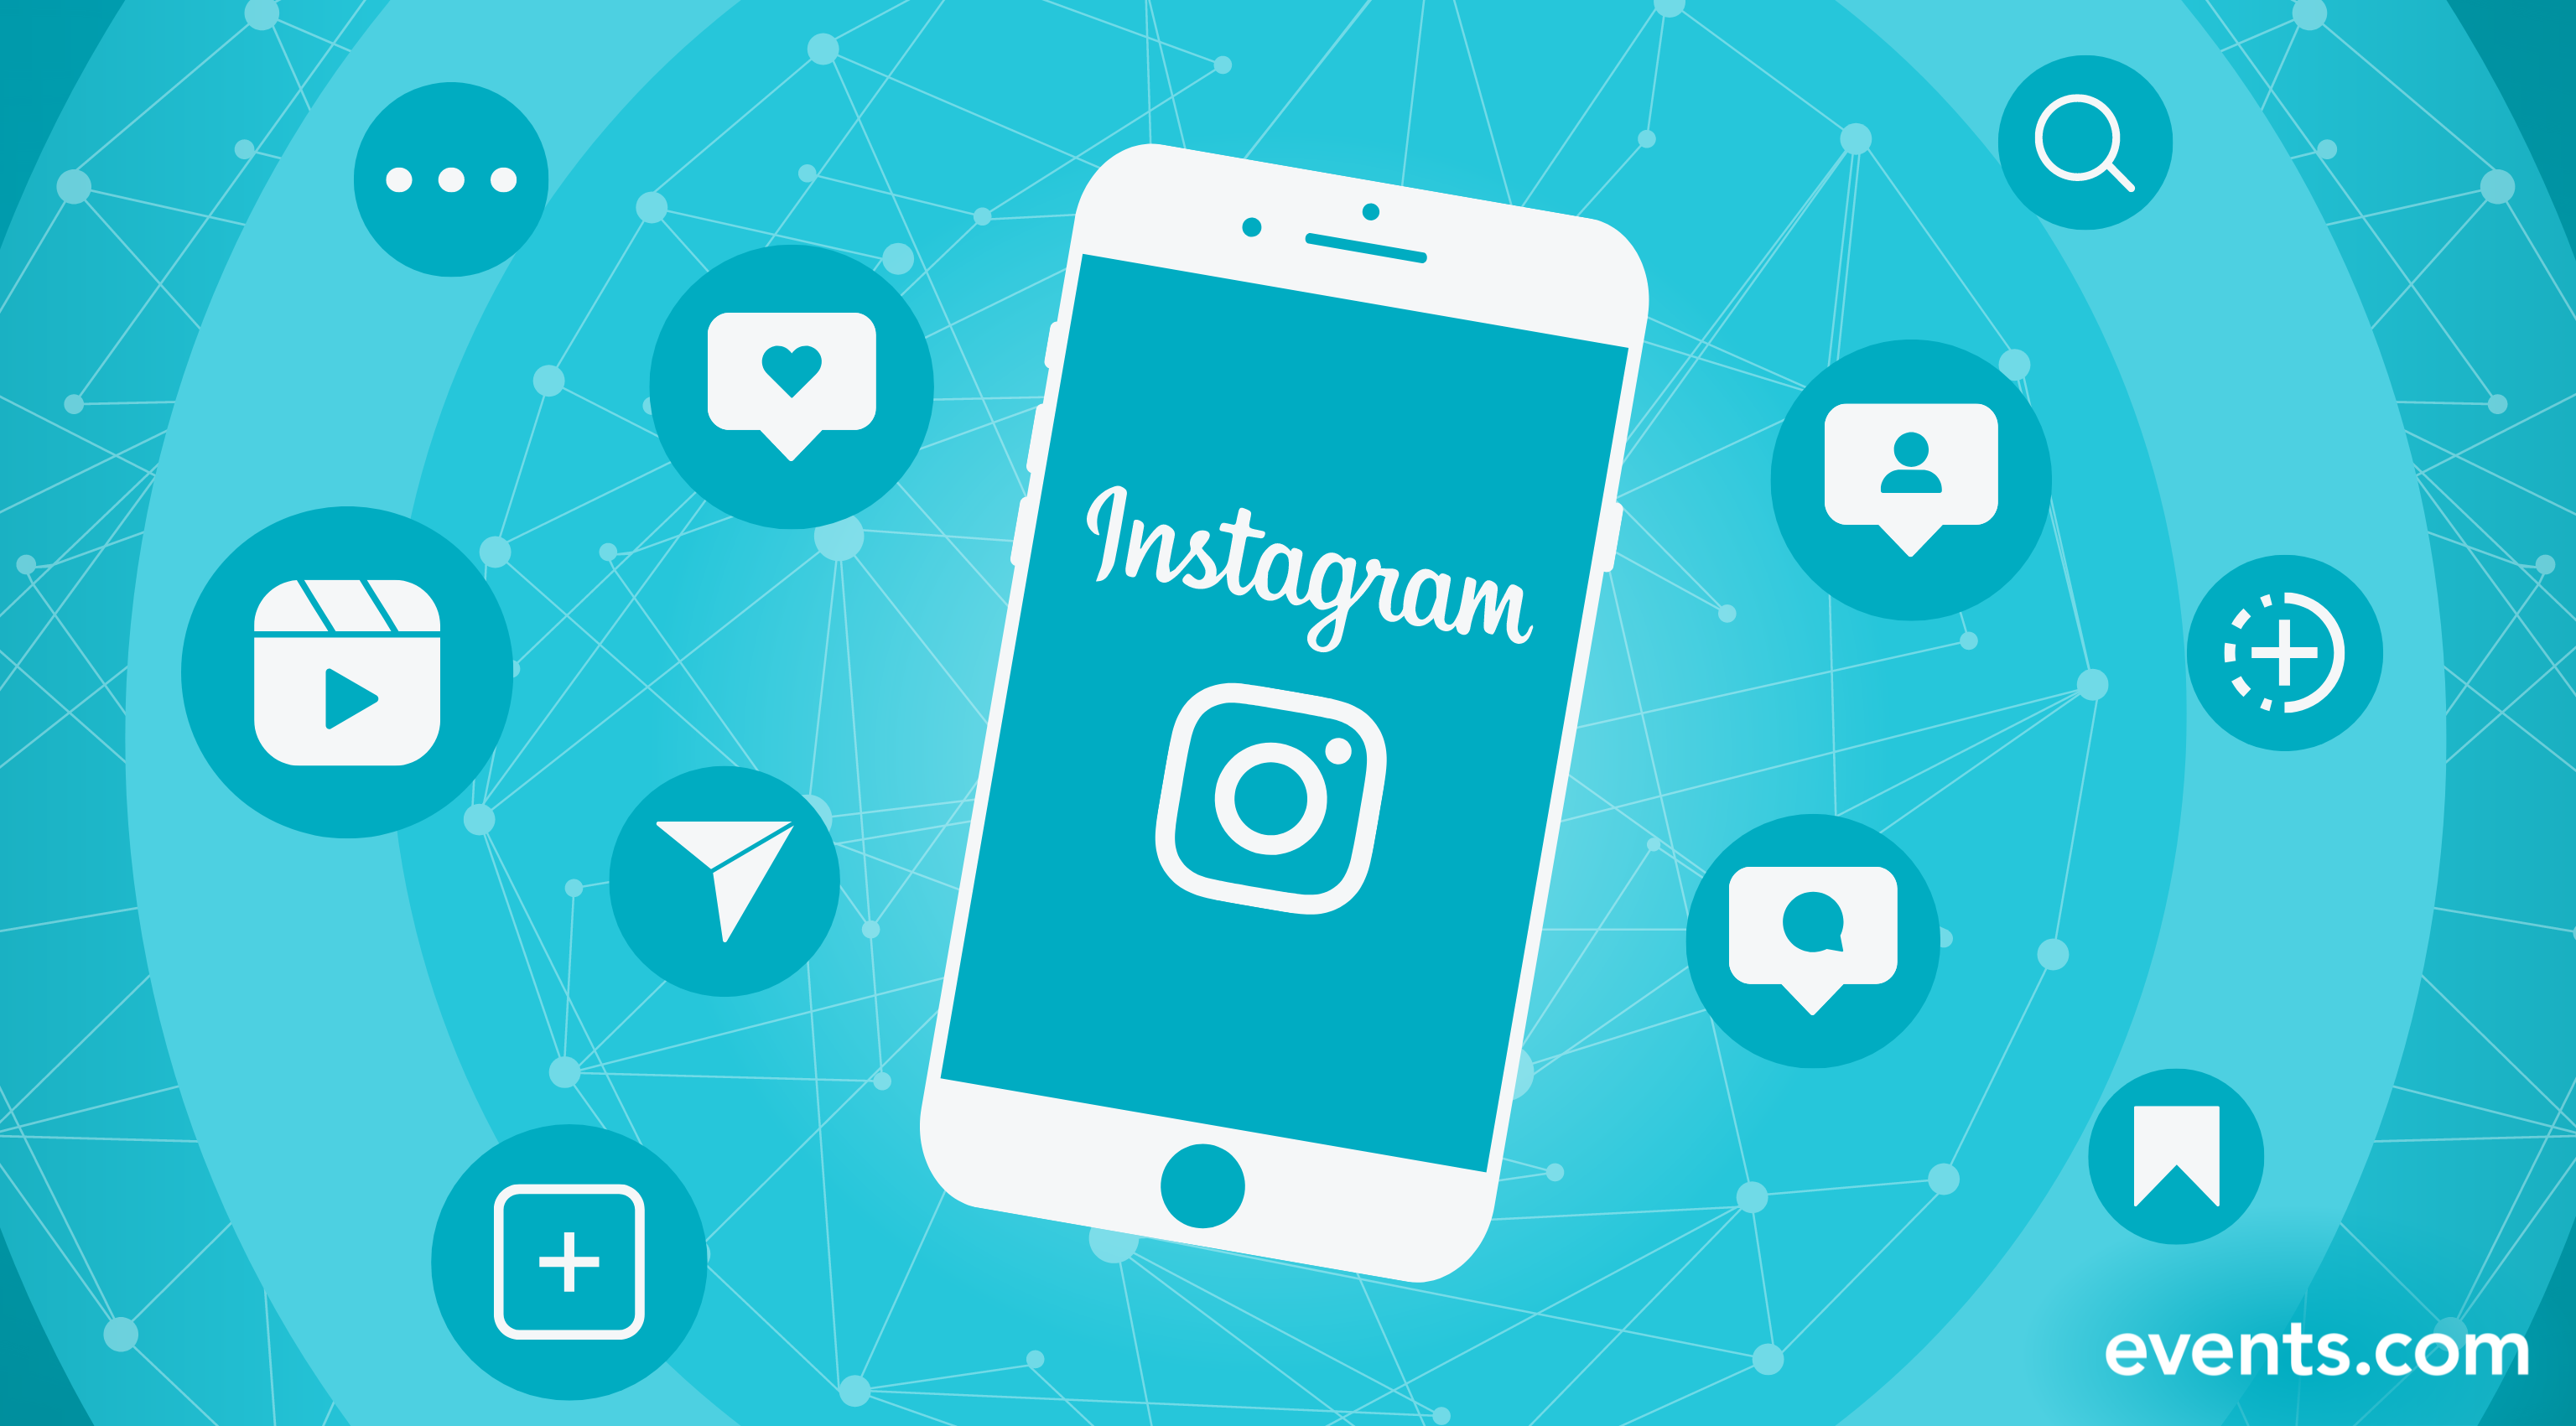 How To Promote an Event on Instagram | 10 Tips for Success